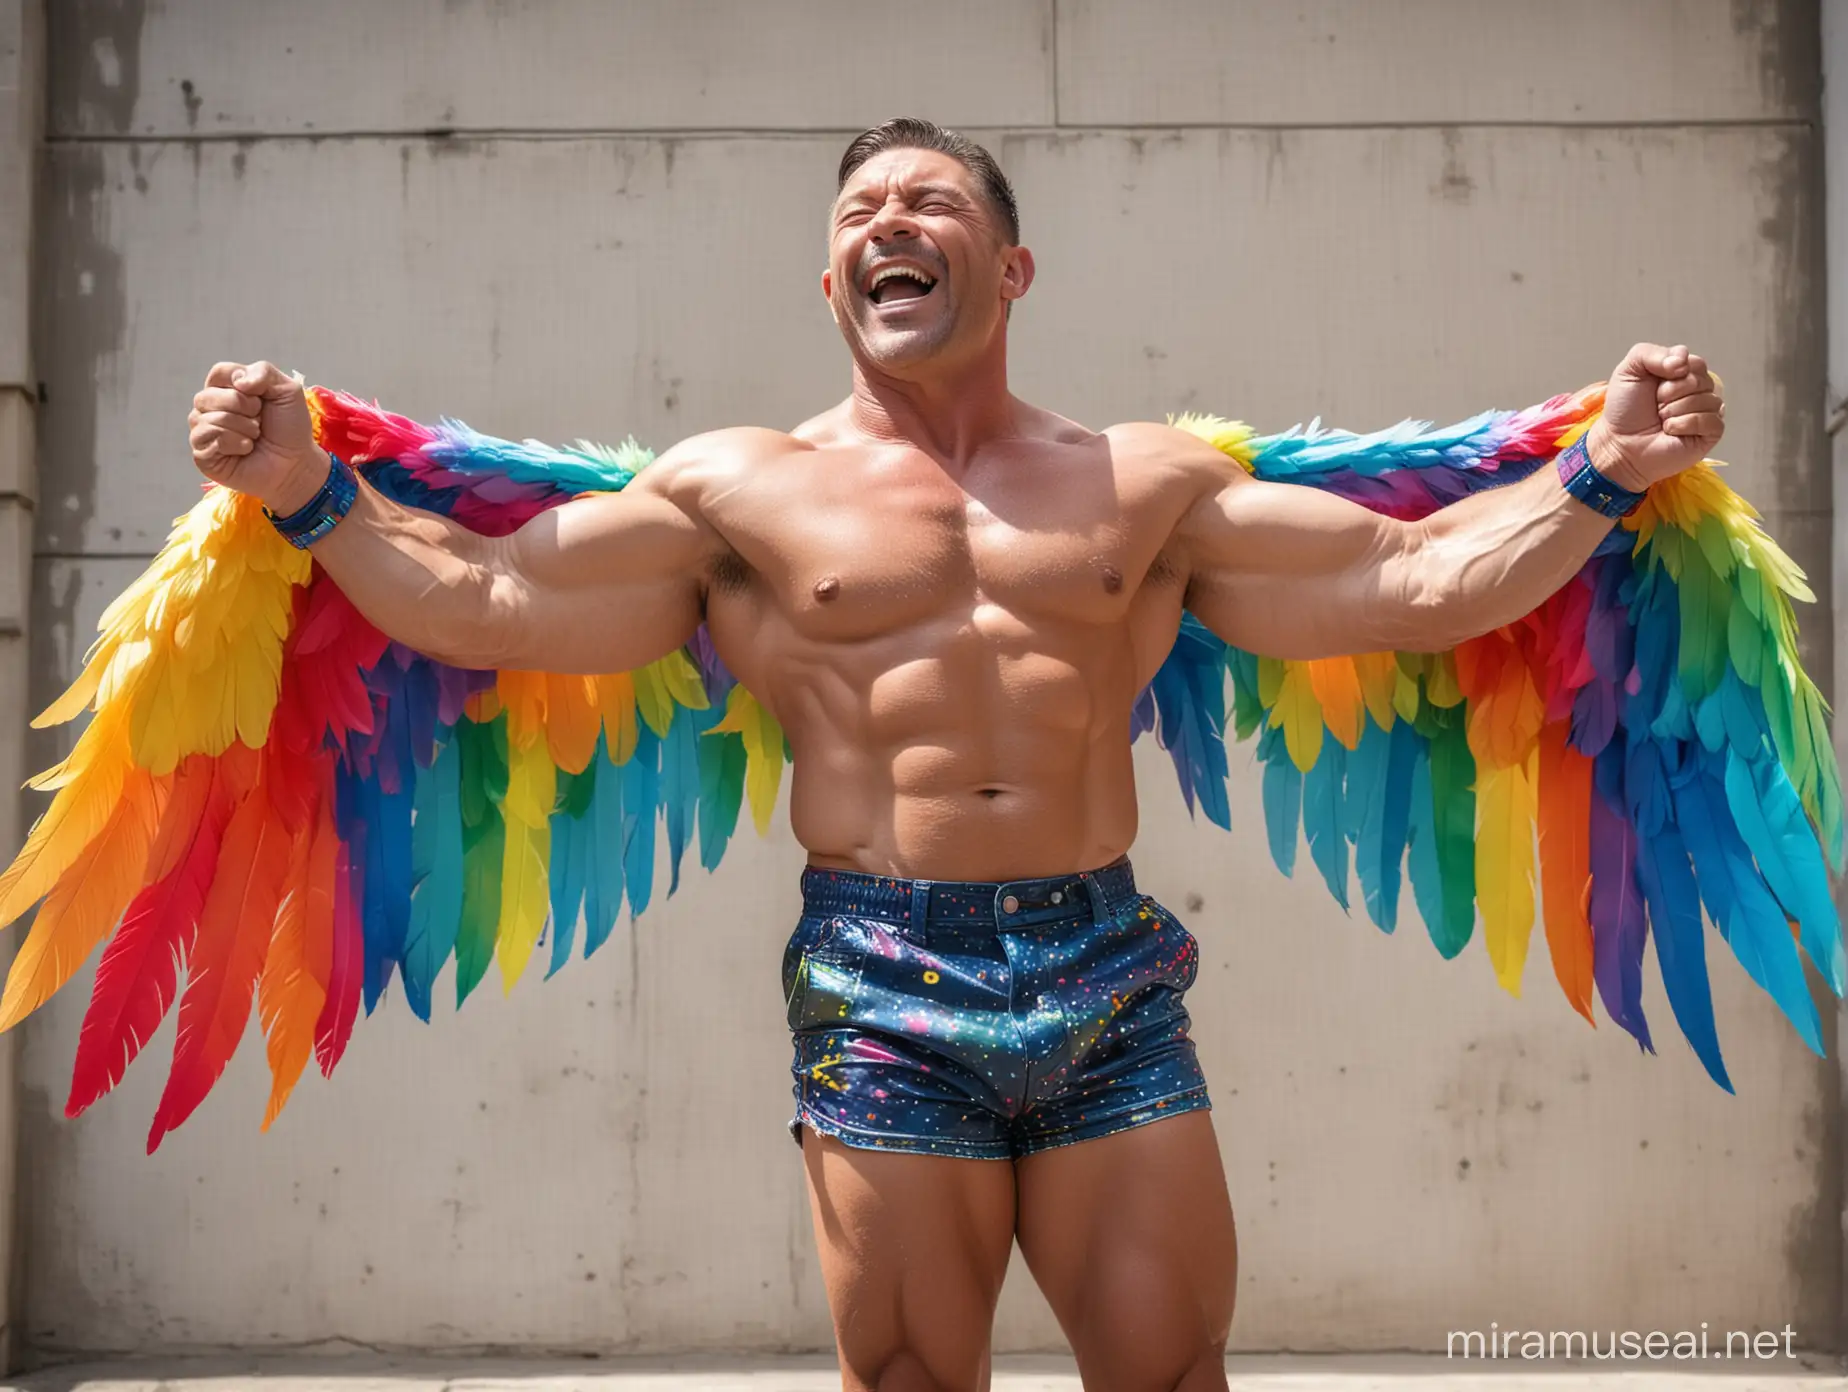 40s Ultra Beefy IFBB Bodybuilder Flexing with Bright Rainbow Coloured Eagle Wings Jacket and Doraemon